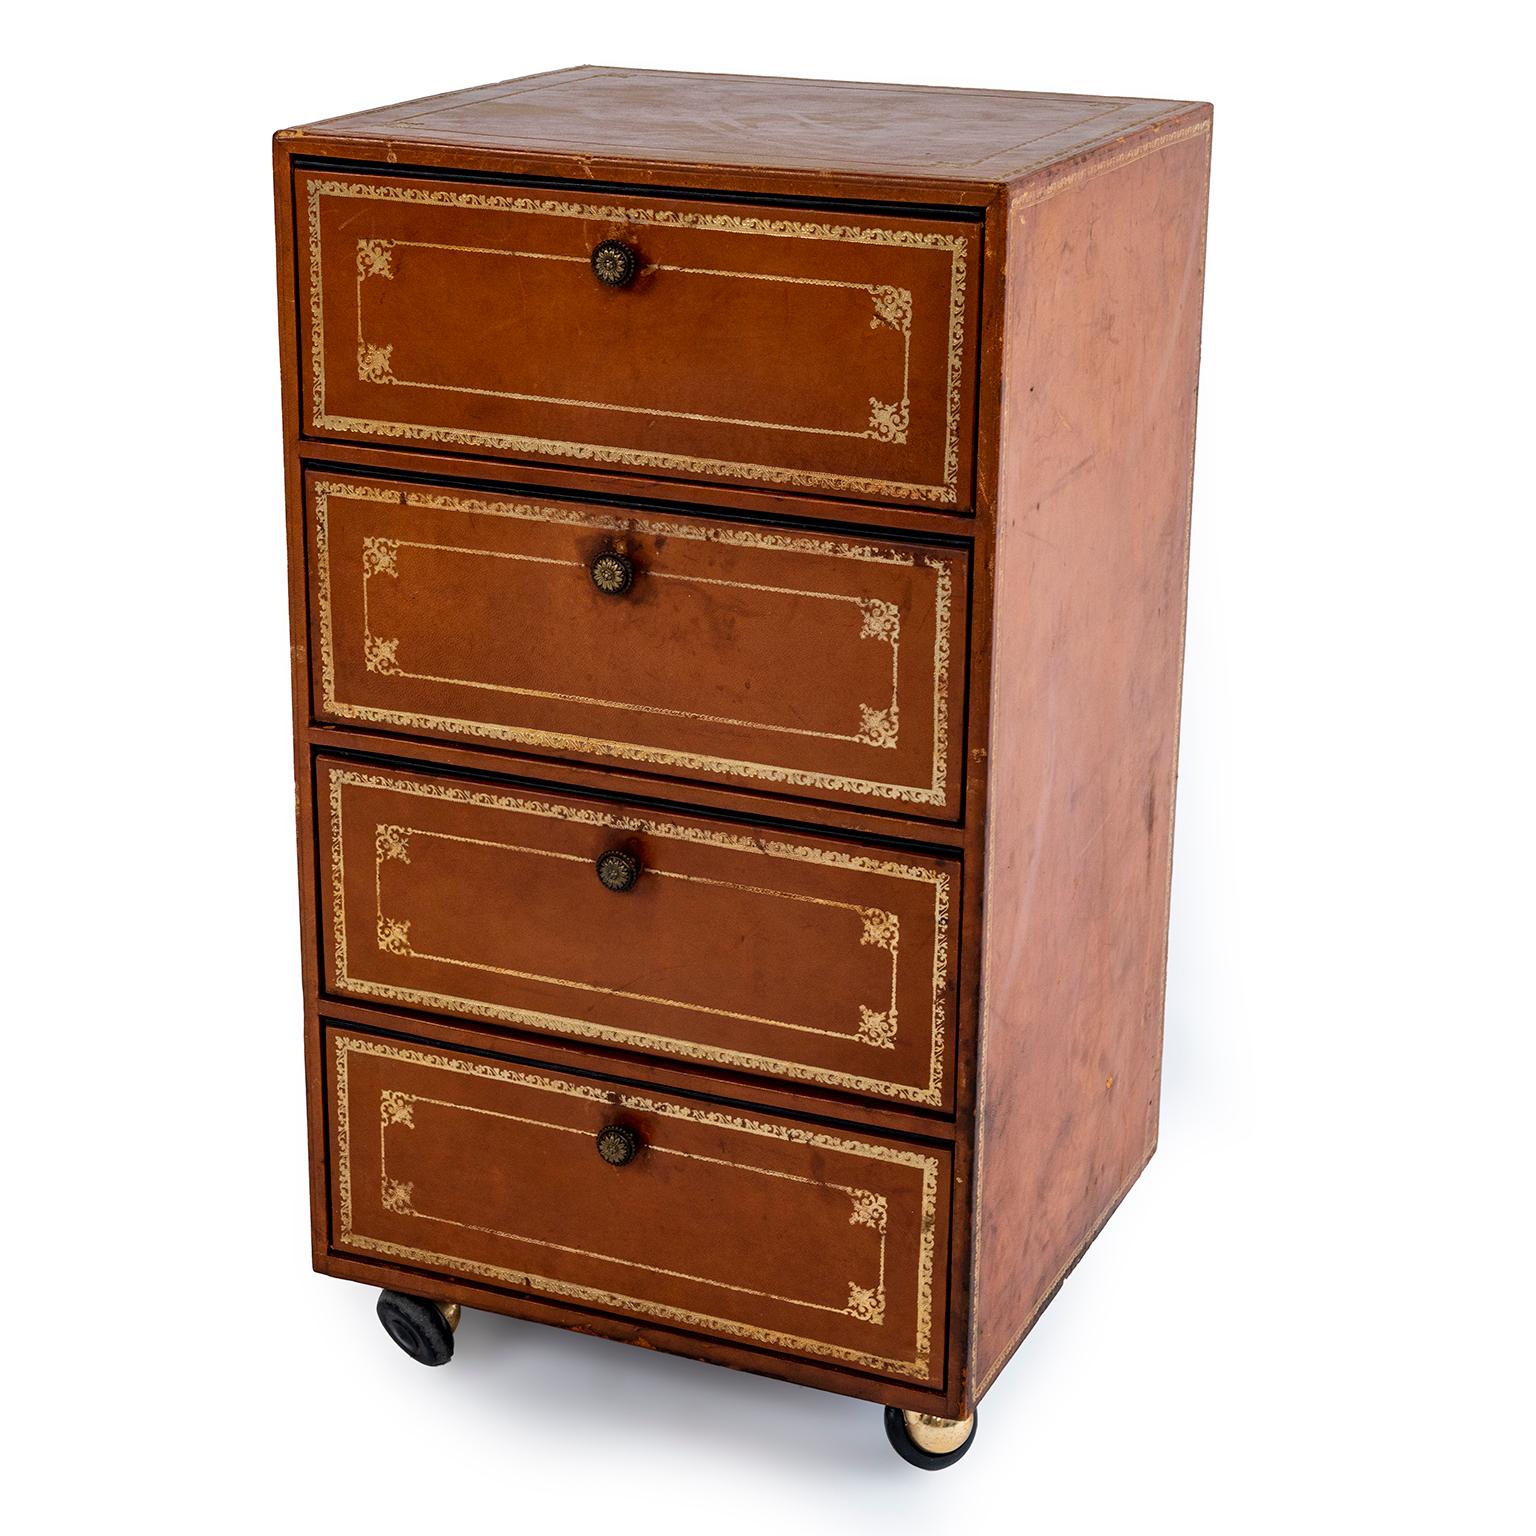 A pair of leather document cabinets or side tables on wheels. Each as 4 drawers, flap in front of each drawer pulls down. See images.